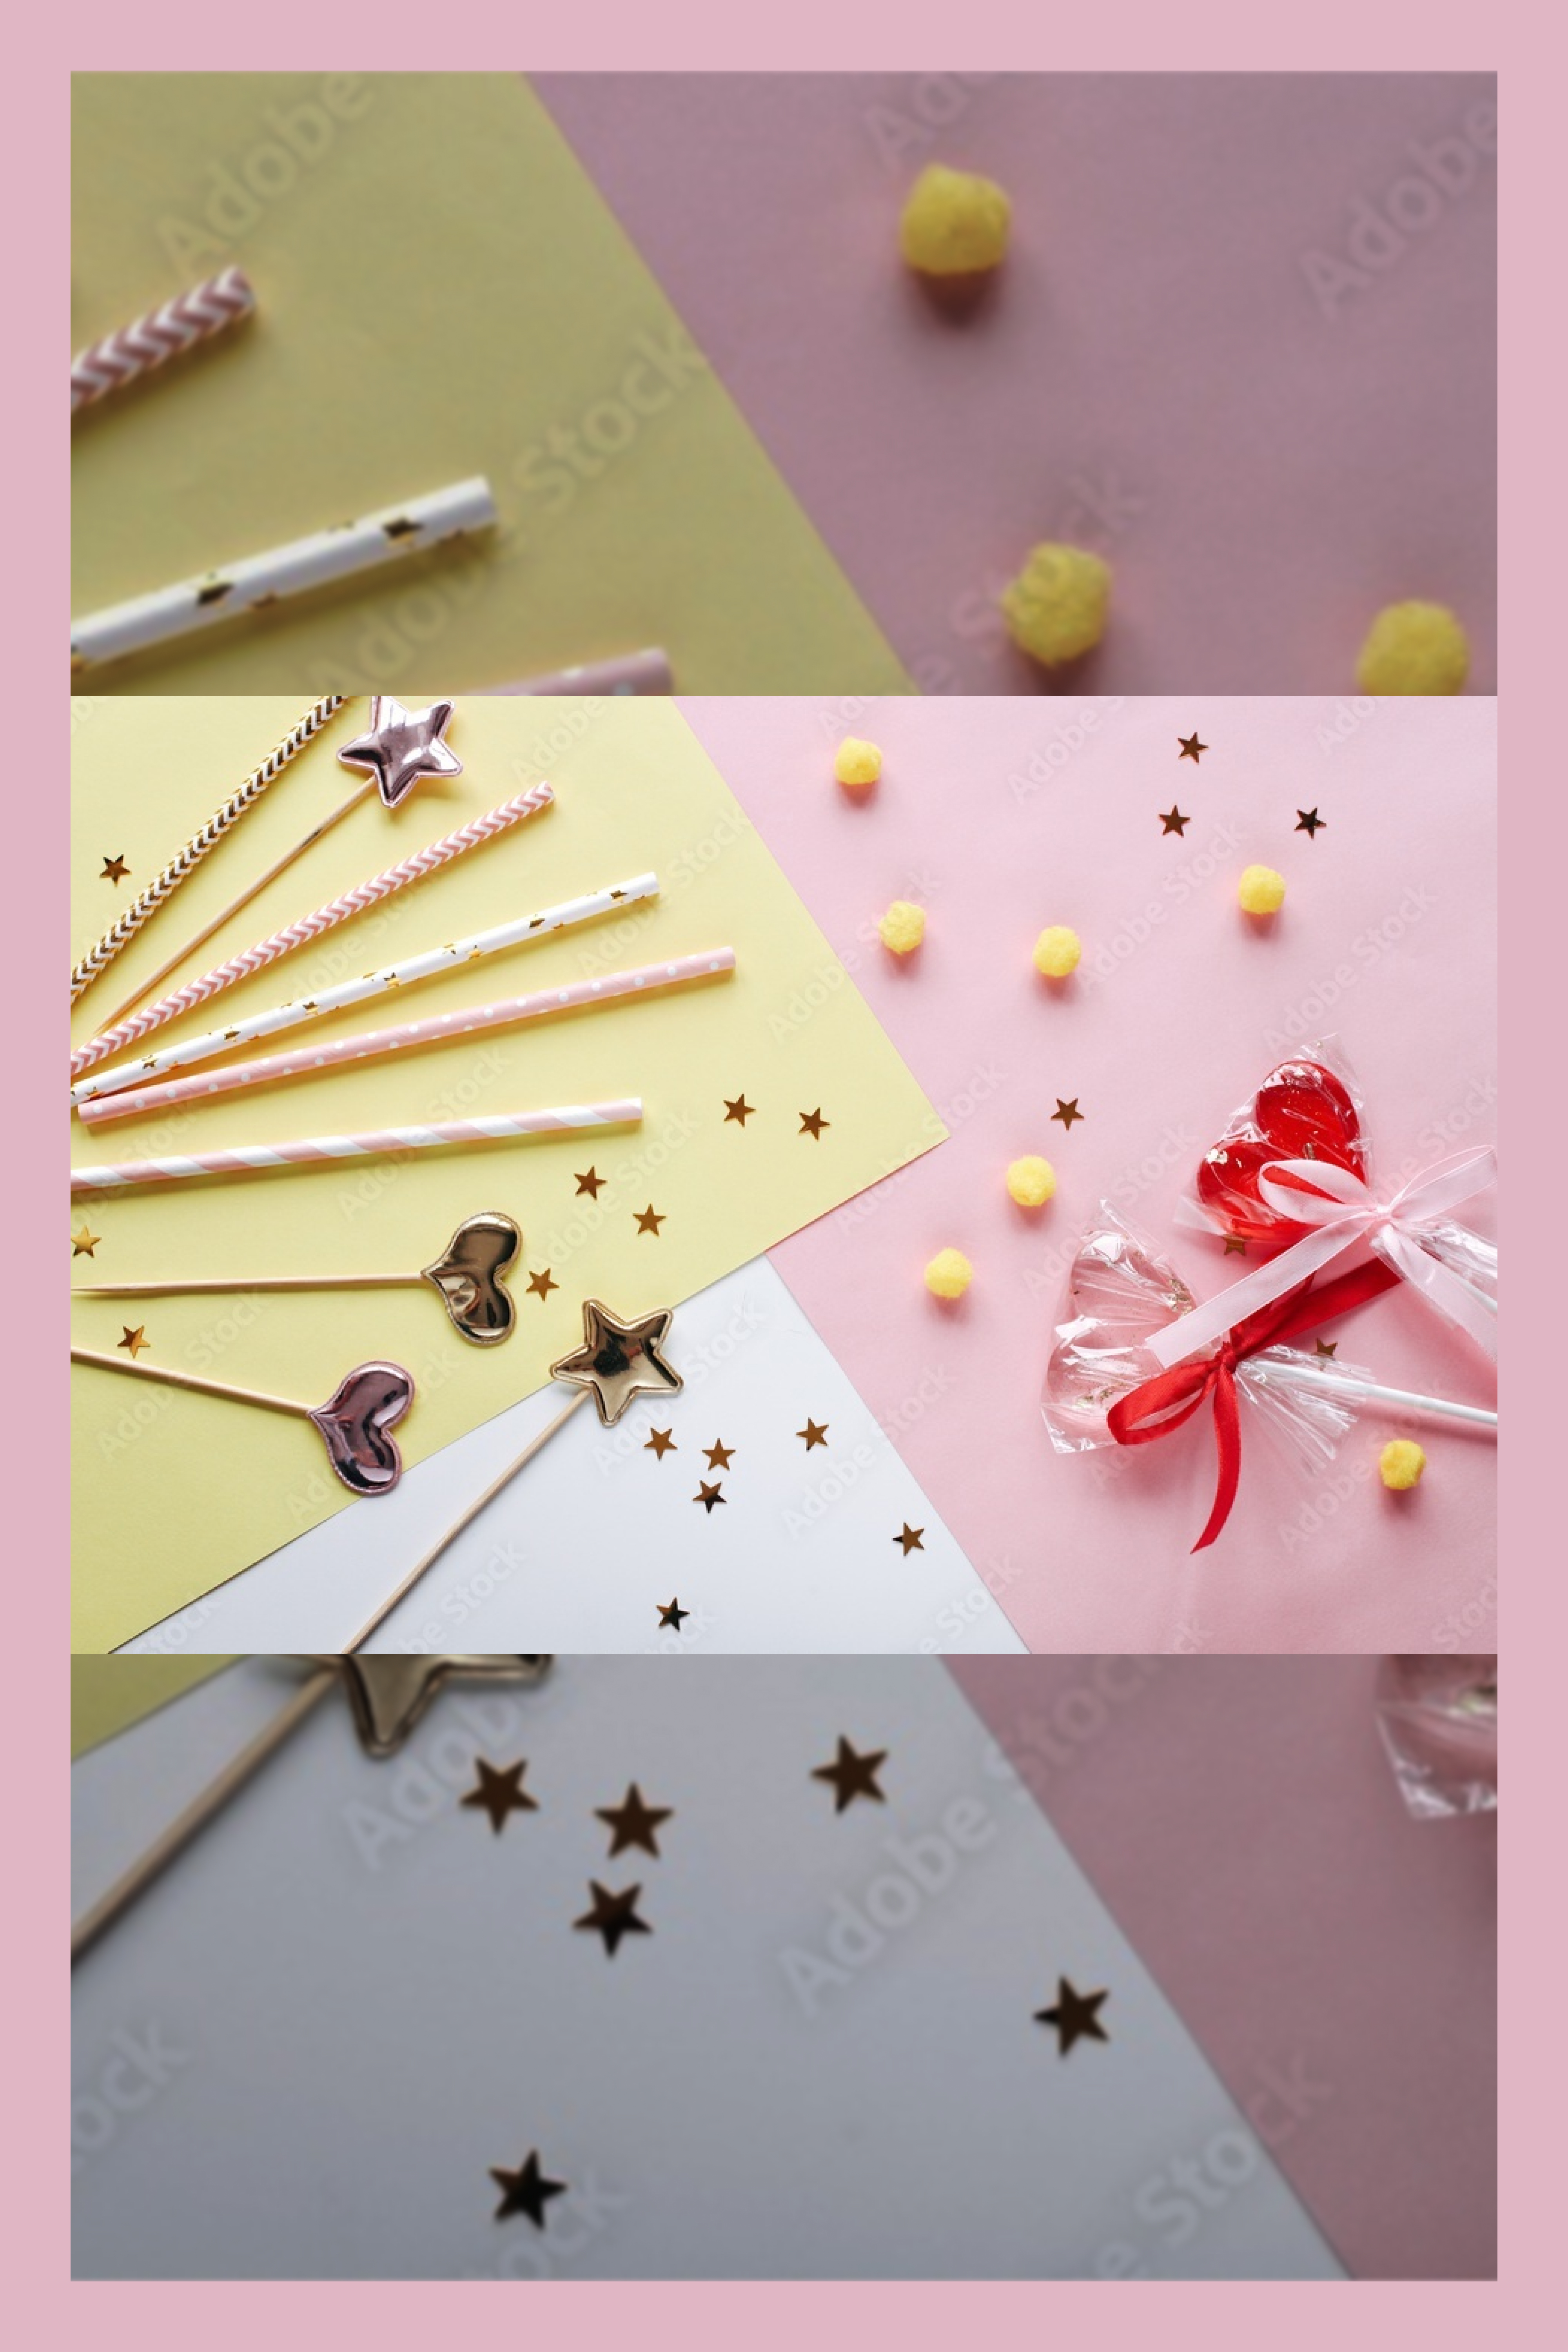 The pastel-colored background decorated with sweet candies and lollipops.